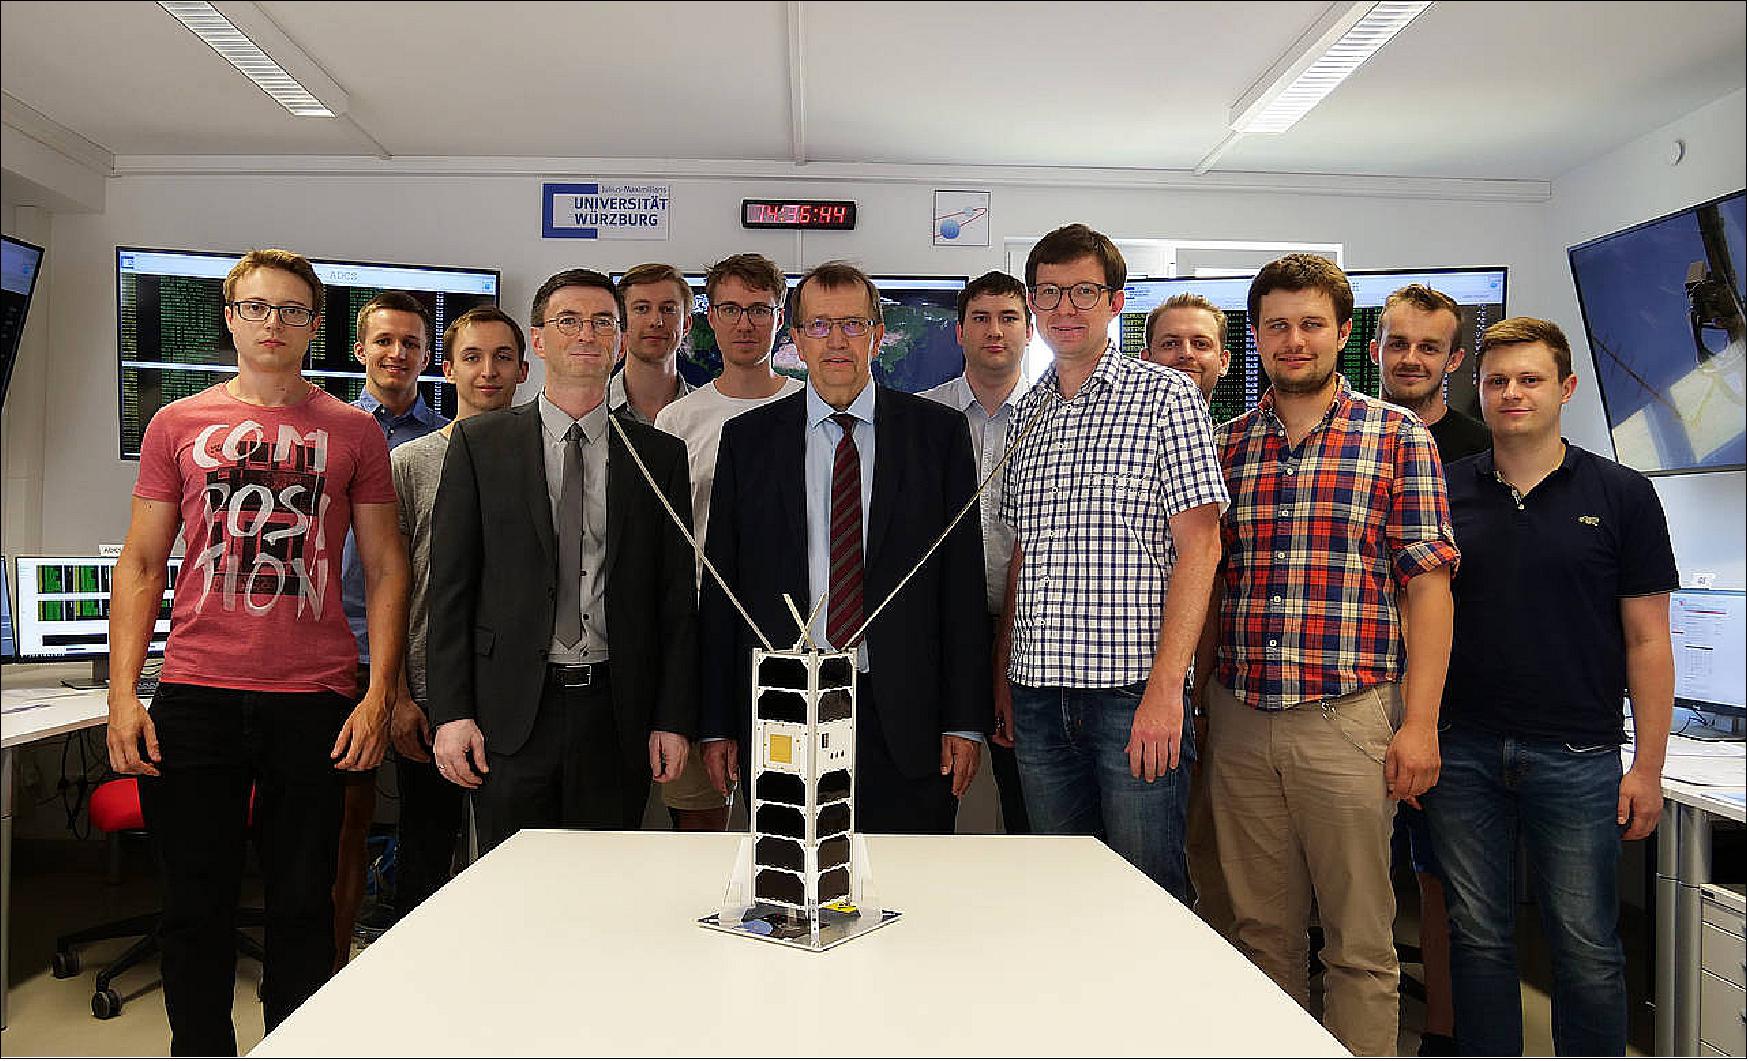 Figure 16: Image of the SONATE student development team,with Prof. Hakan Kayal (fourth from left), Prof. Alfred Forchel (President of the University of Würzburg, center of image) and project manager Oleksii Balagurin (fifth from right), image credit: Kristian Lozina / University of Würzburg)